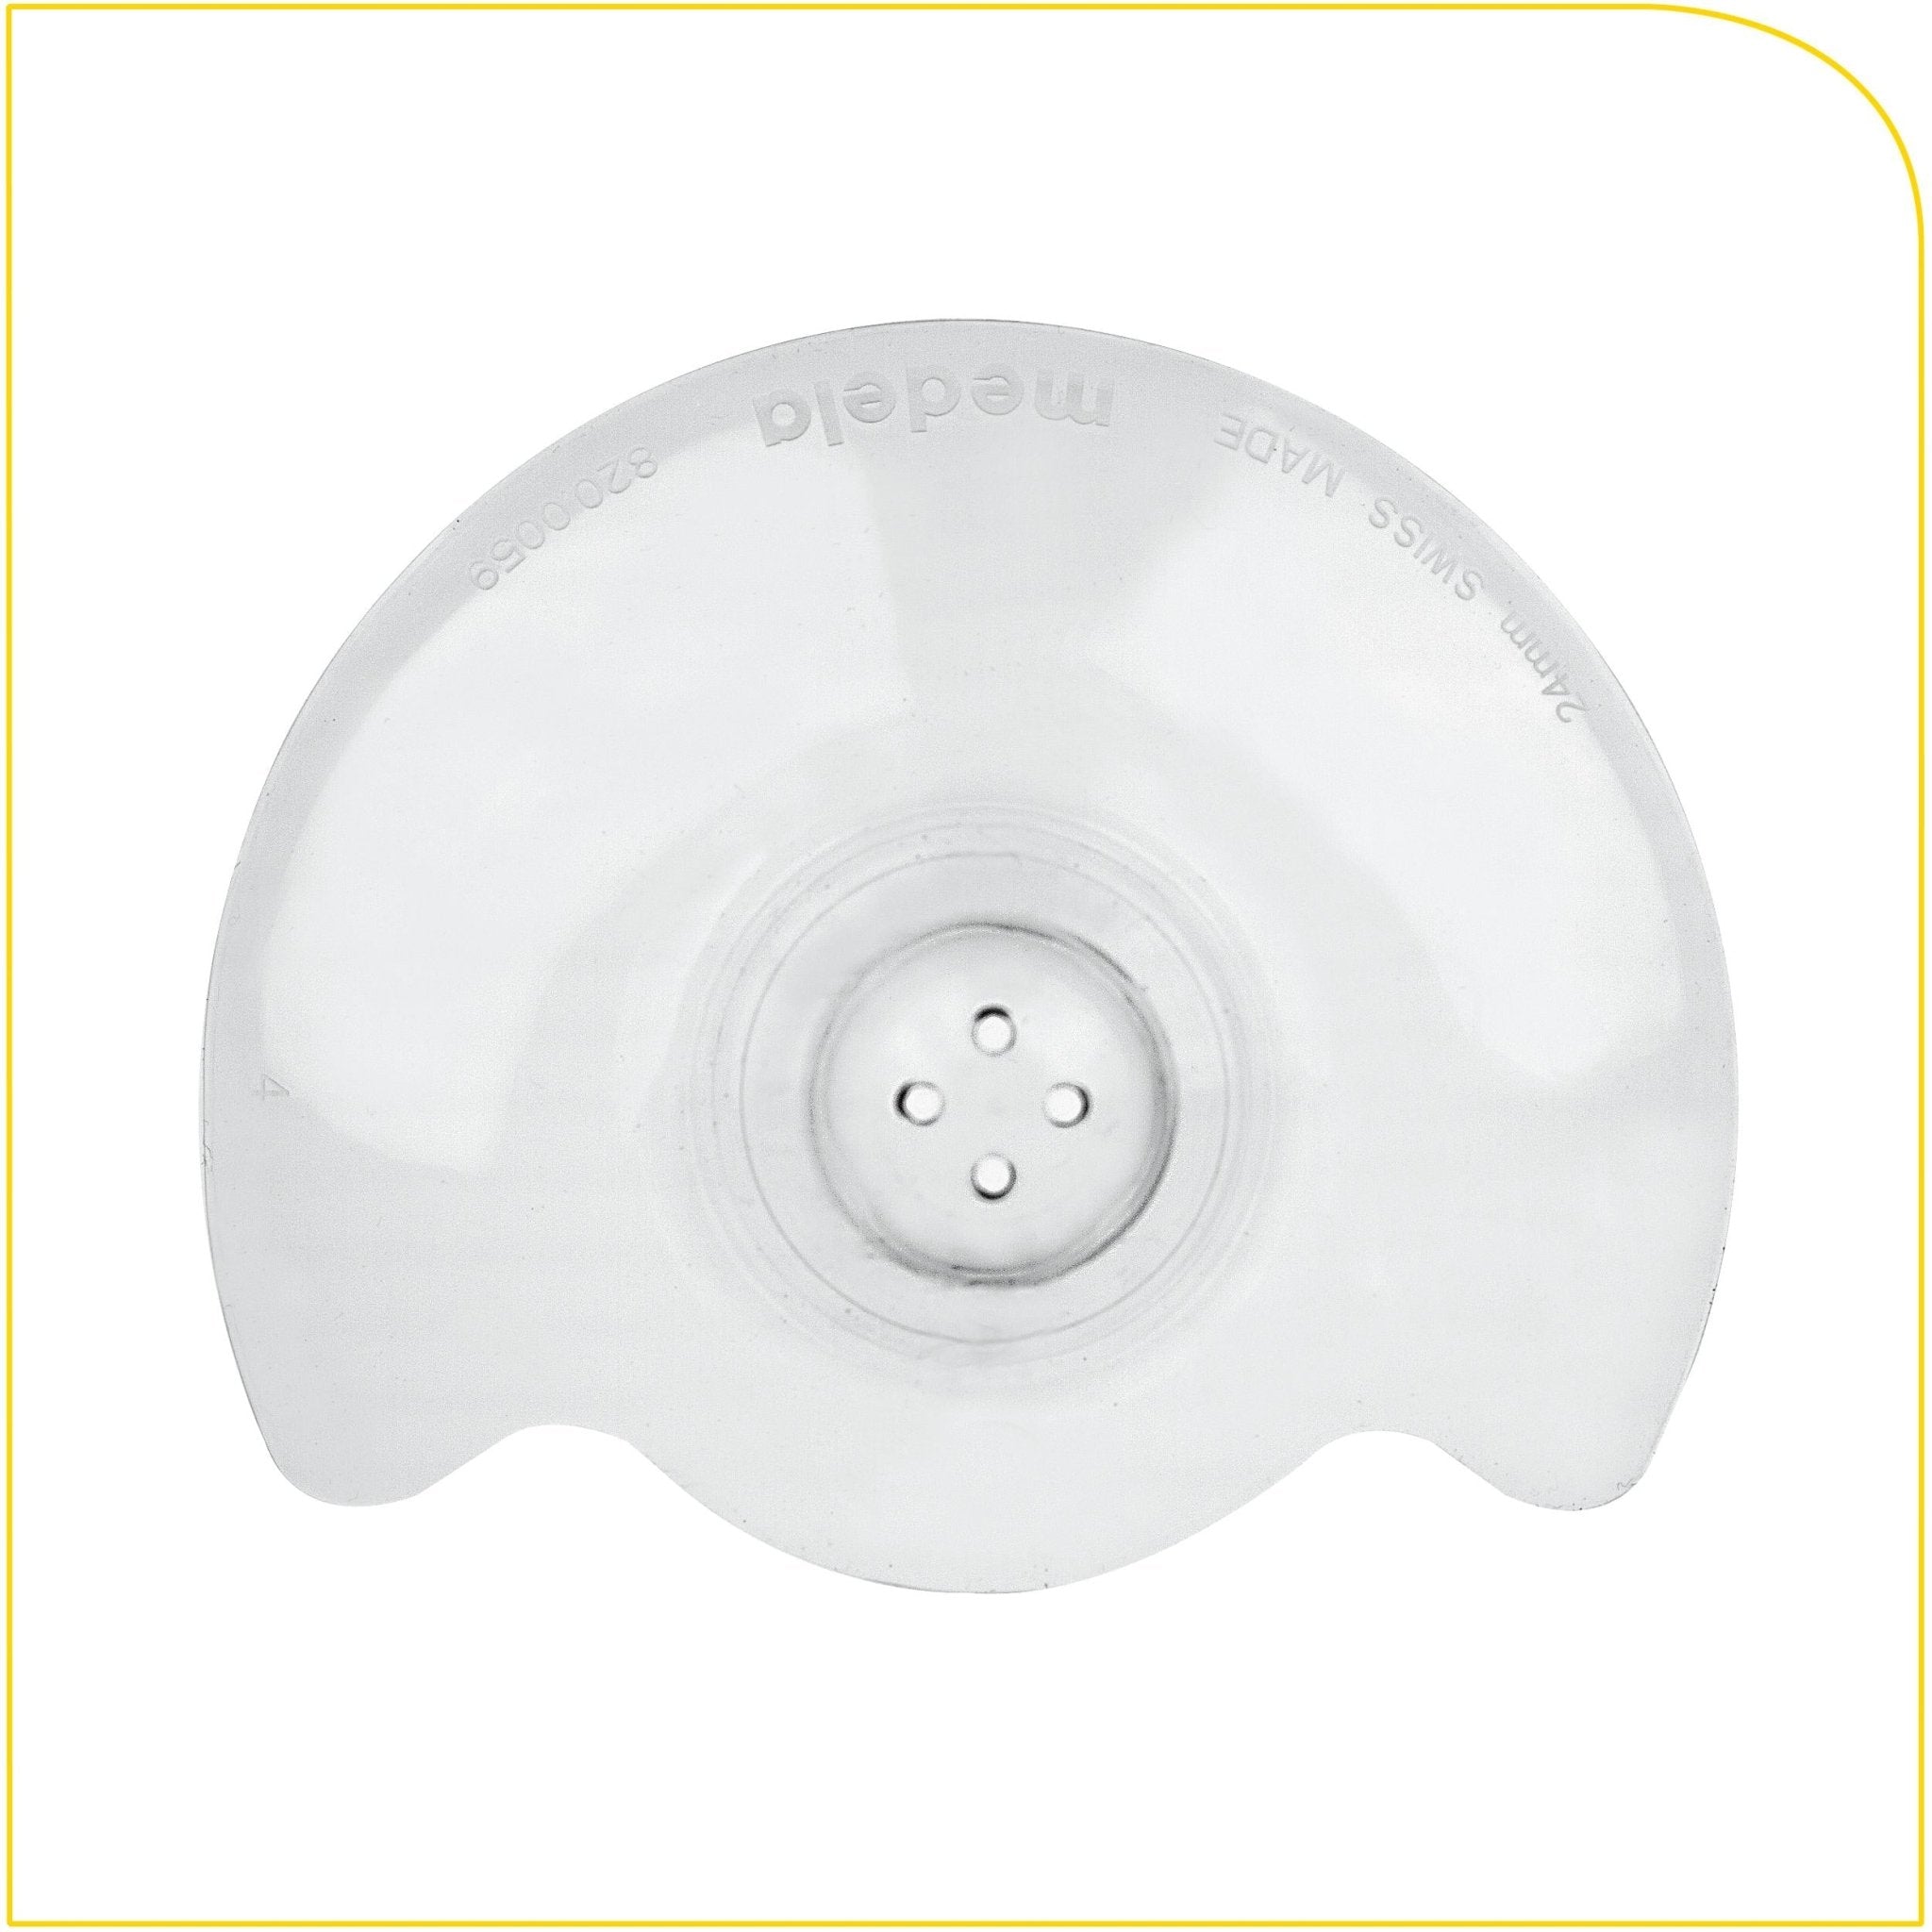 MEDELA Contact Nipple Shield - Nippleshield for Breastfeeding with Latch Difficulties - Made Without BPA (Pack of 2) - ANB Baby -Medela